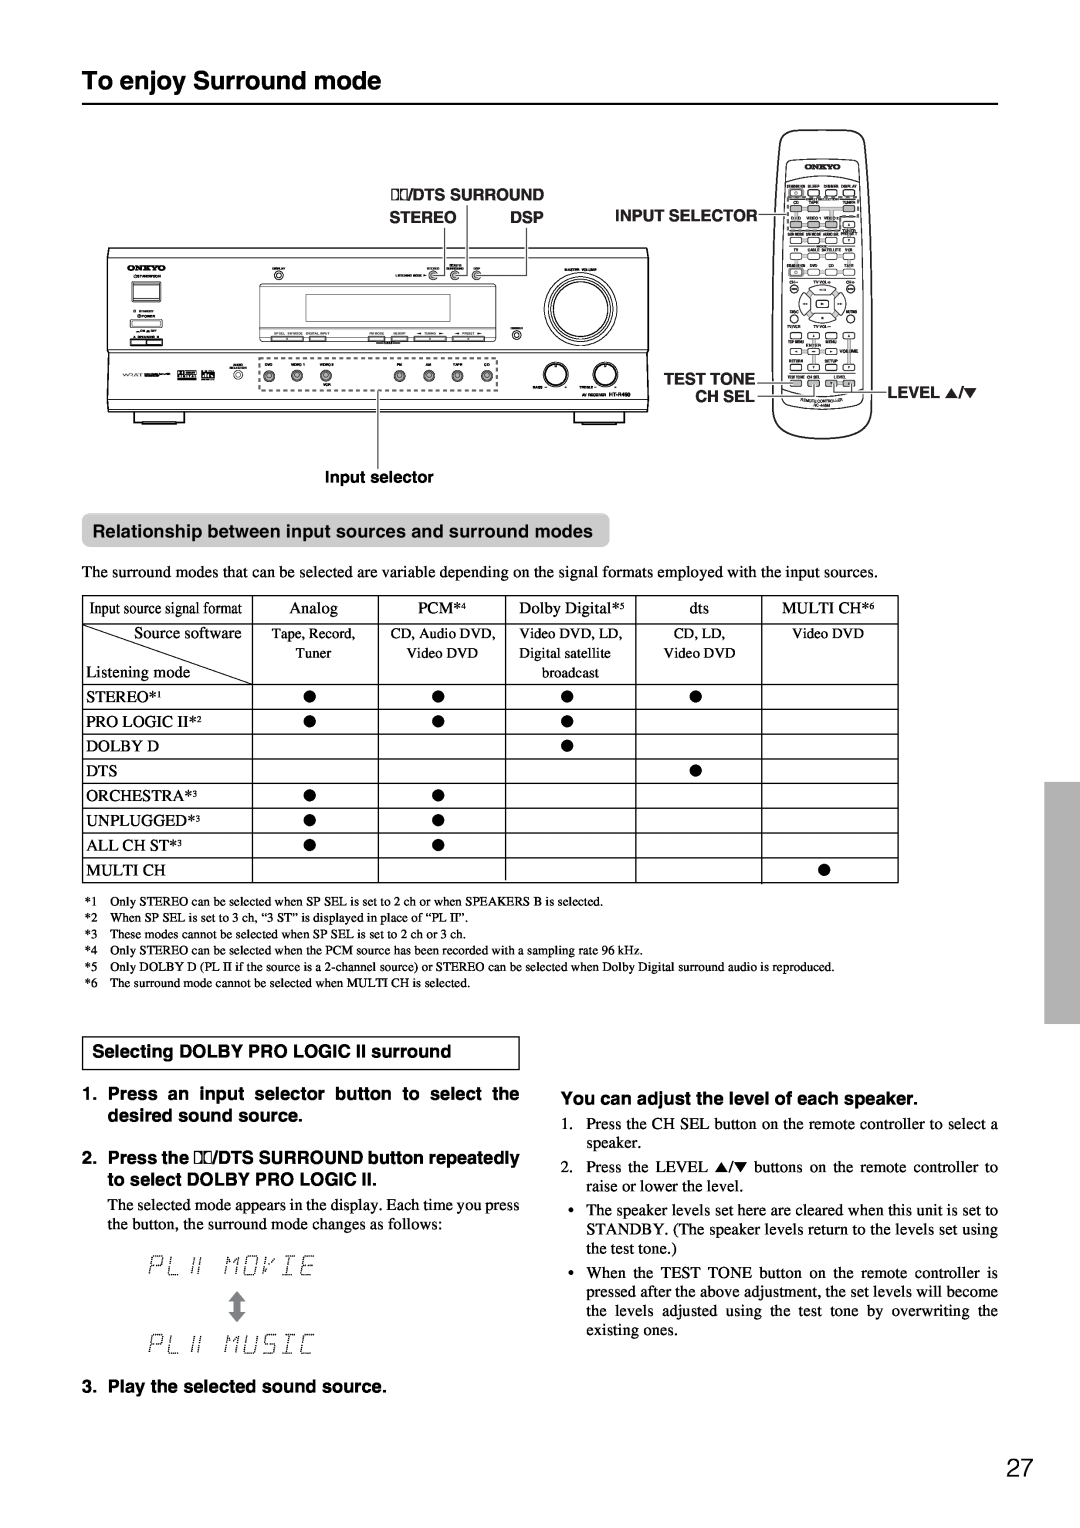 Onkyo HT-R490 To enjoy Surround mode, Dts Surround, Stereo, Input Selector, Test Tone, Ch Sel, LEVEL 5/∞, Input selector 